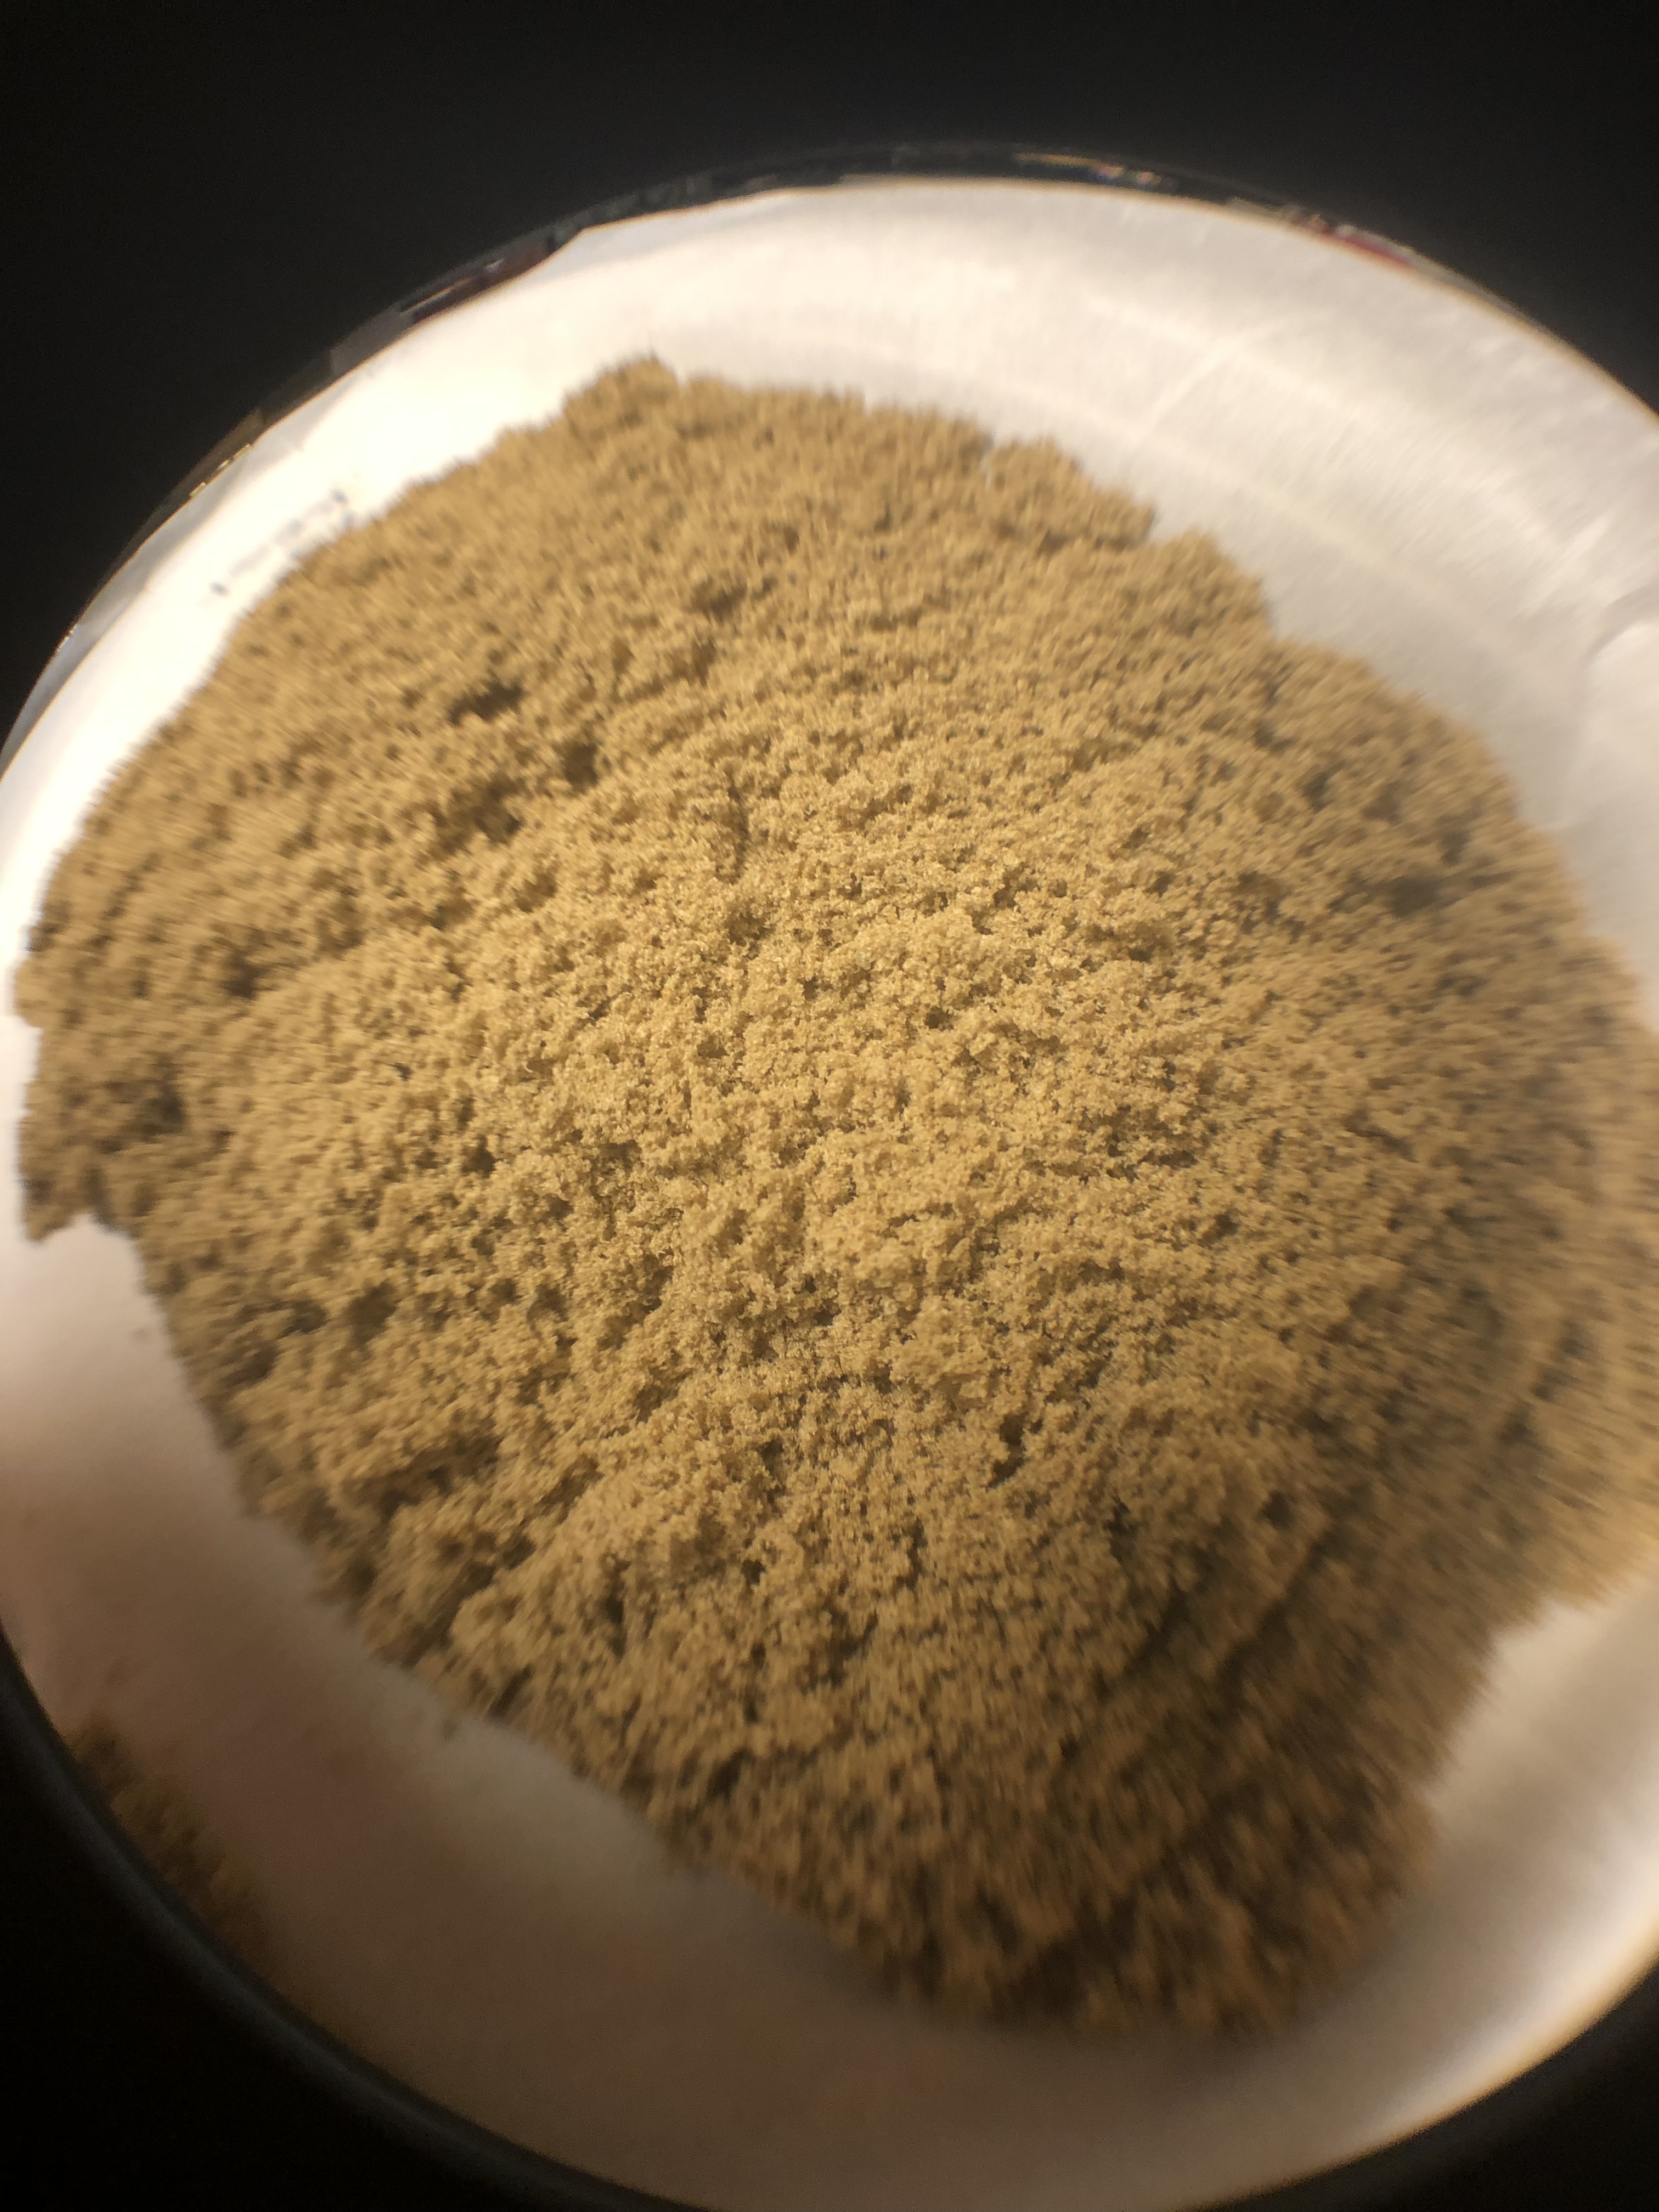 Best Ways to Dry Bubble Hash